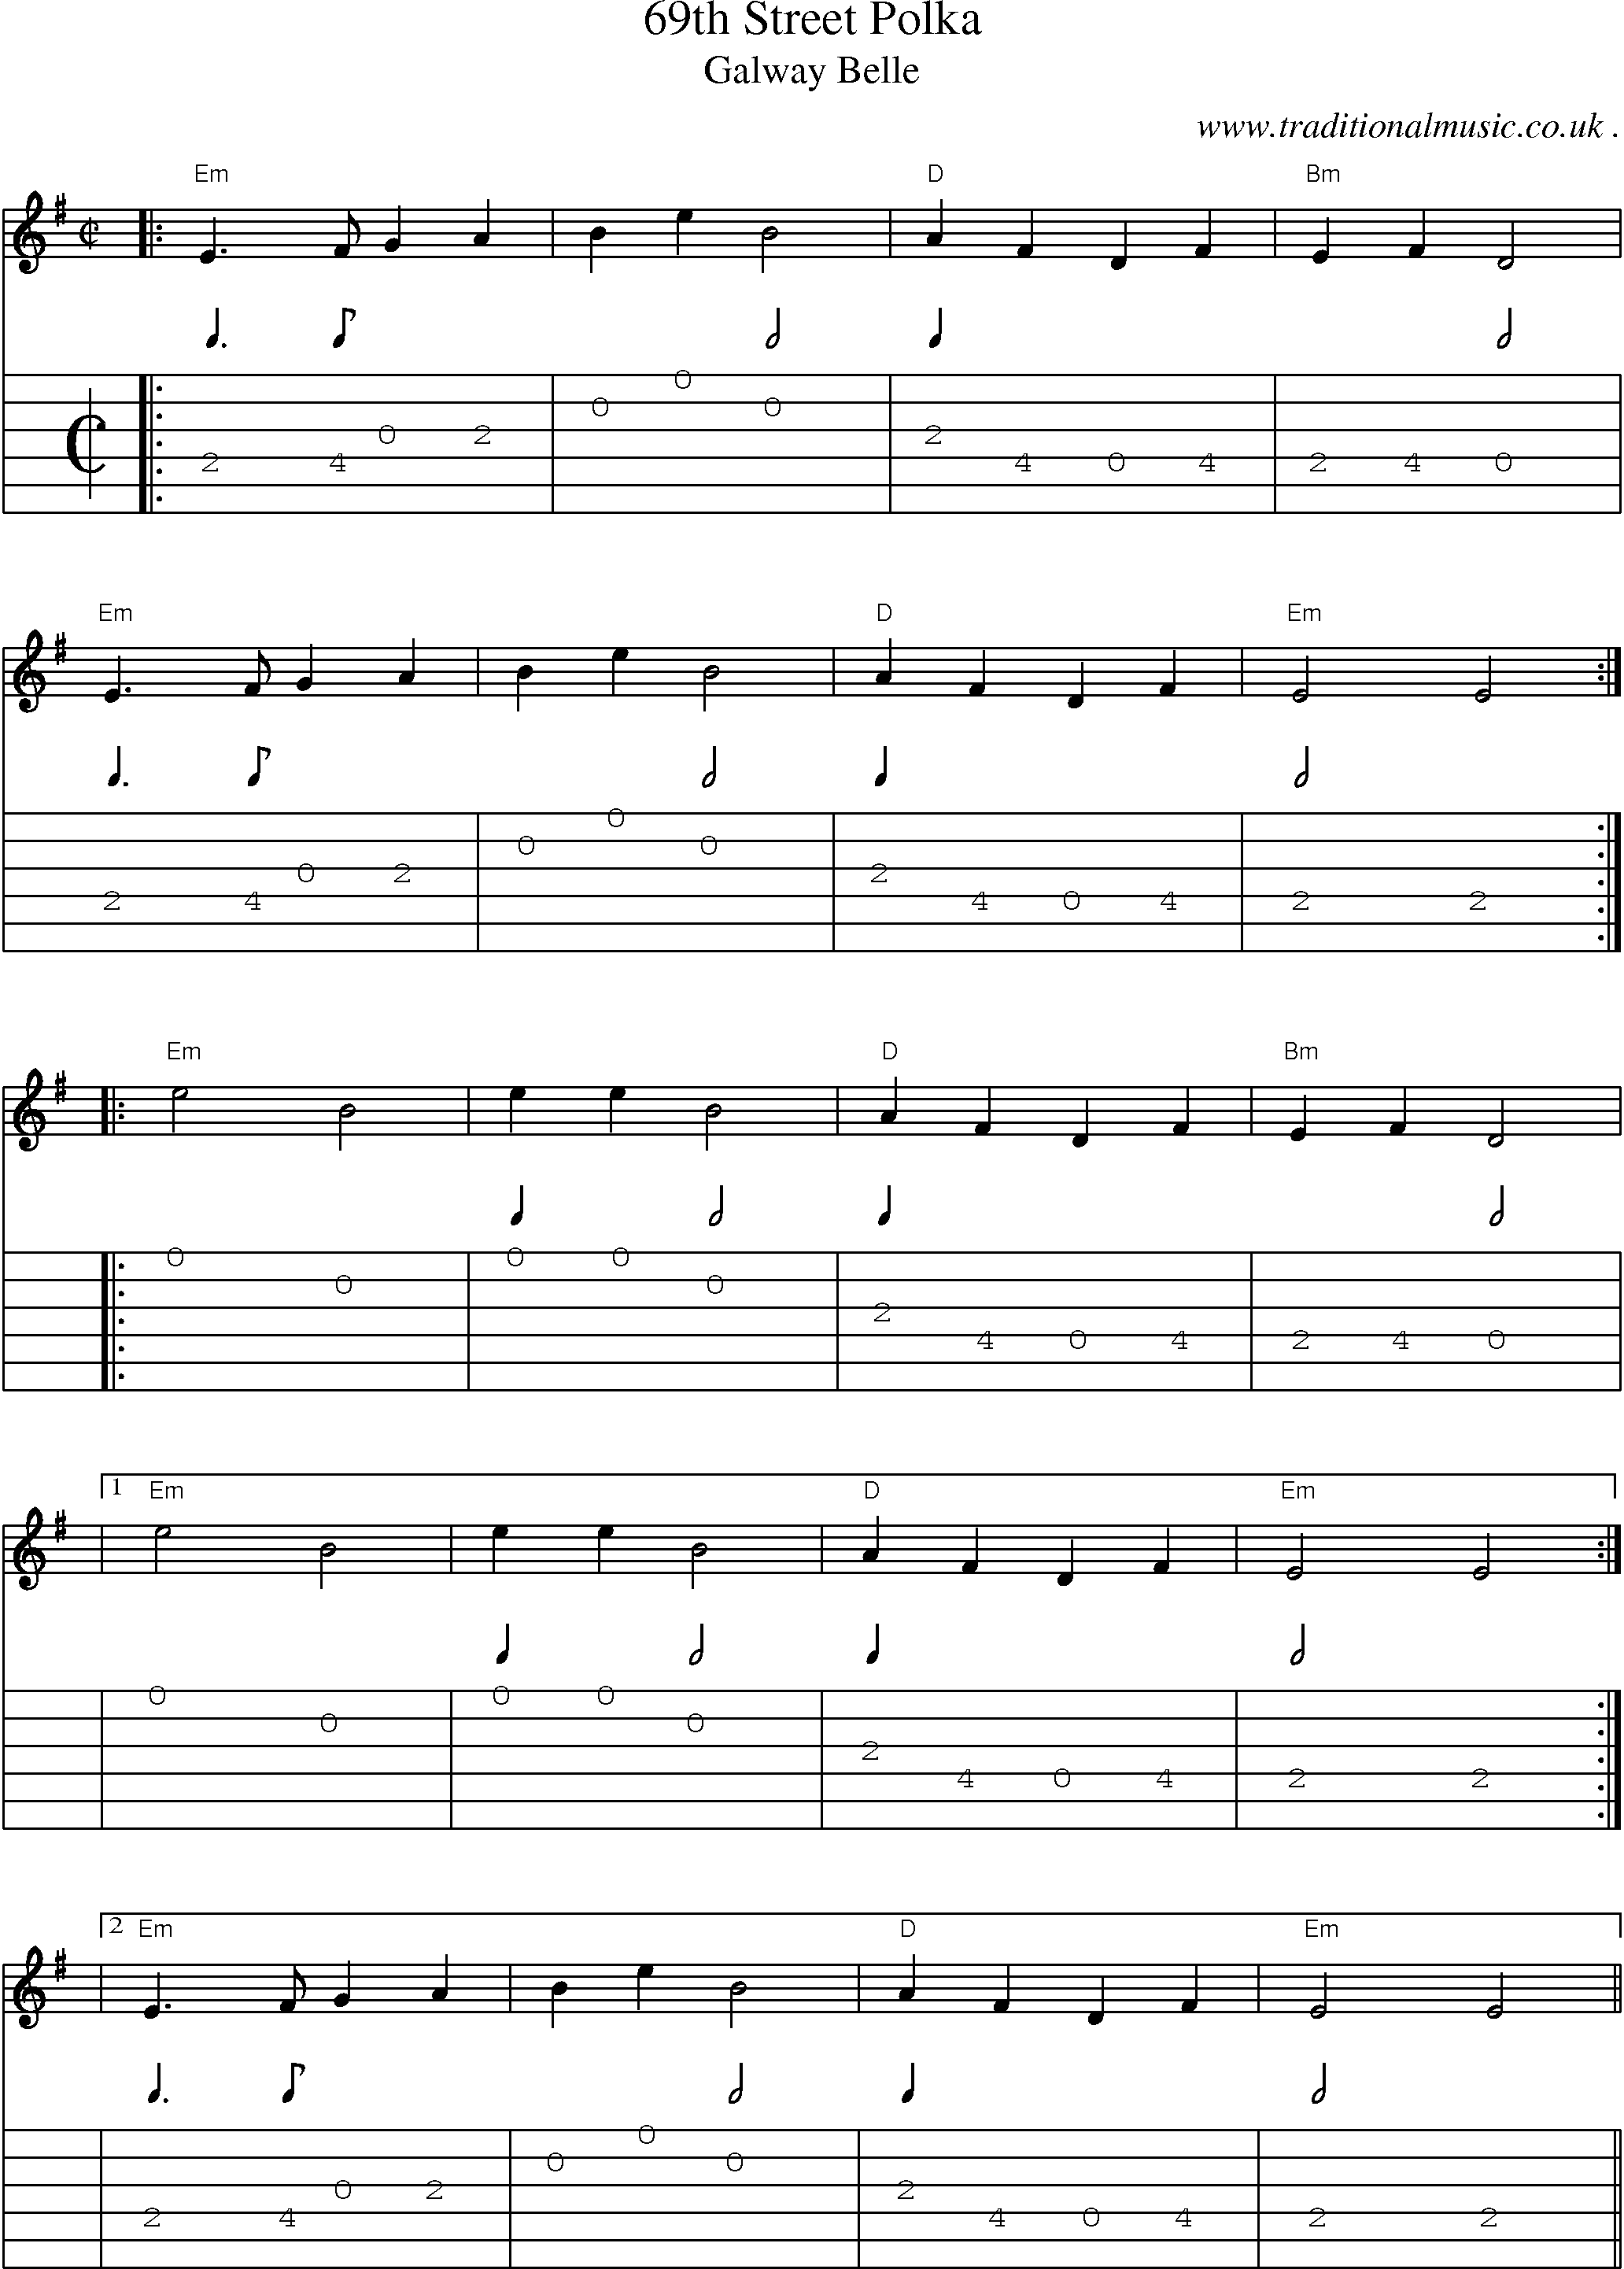 Music Score and Guitar Tabs for 69th Street Polka